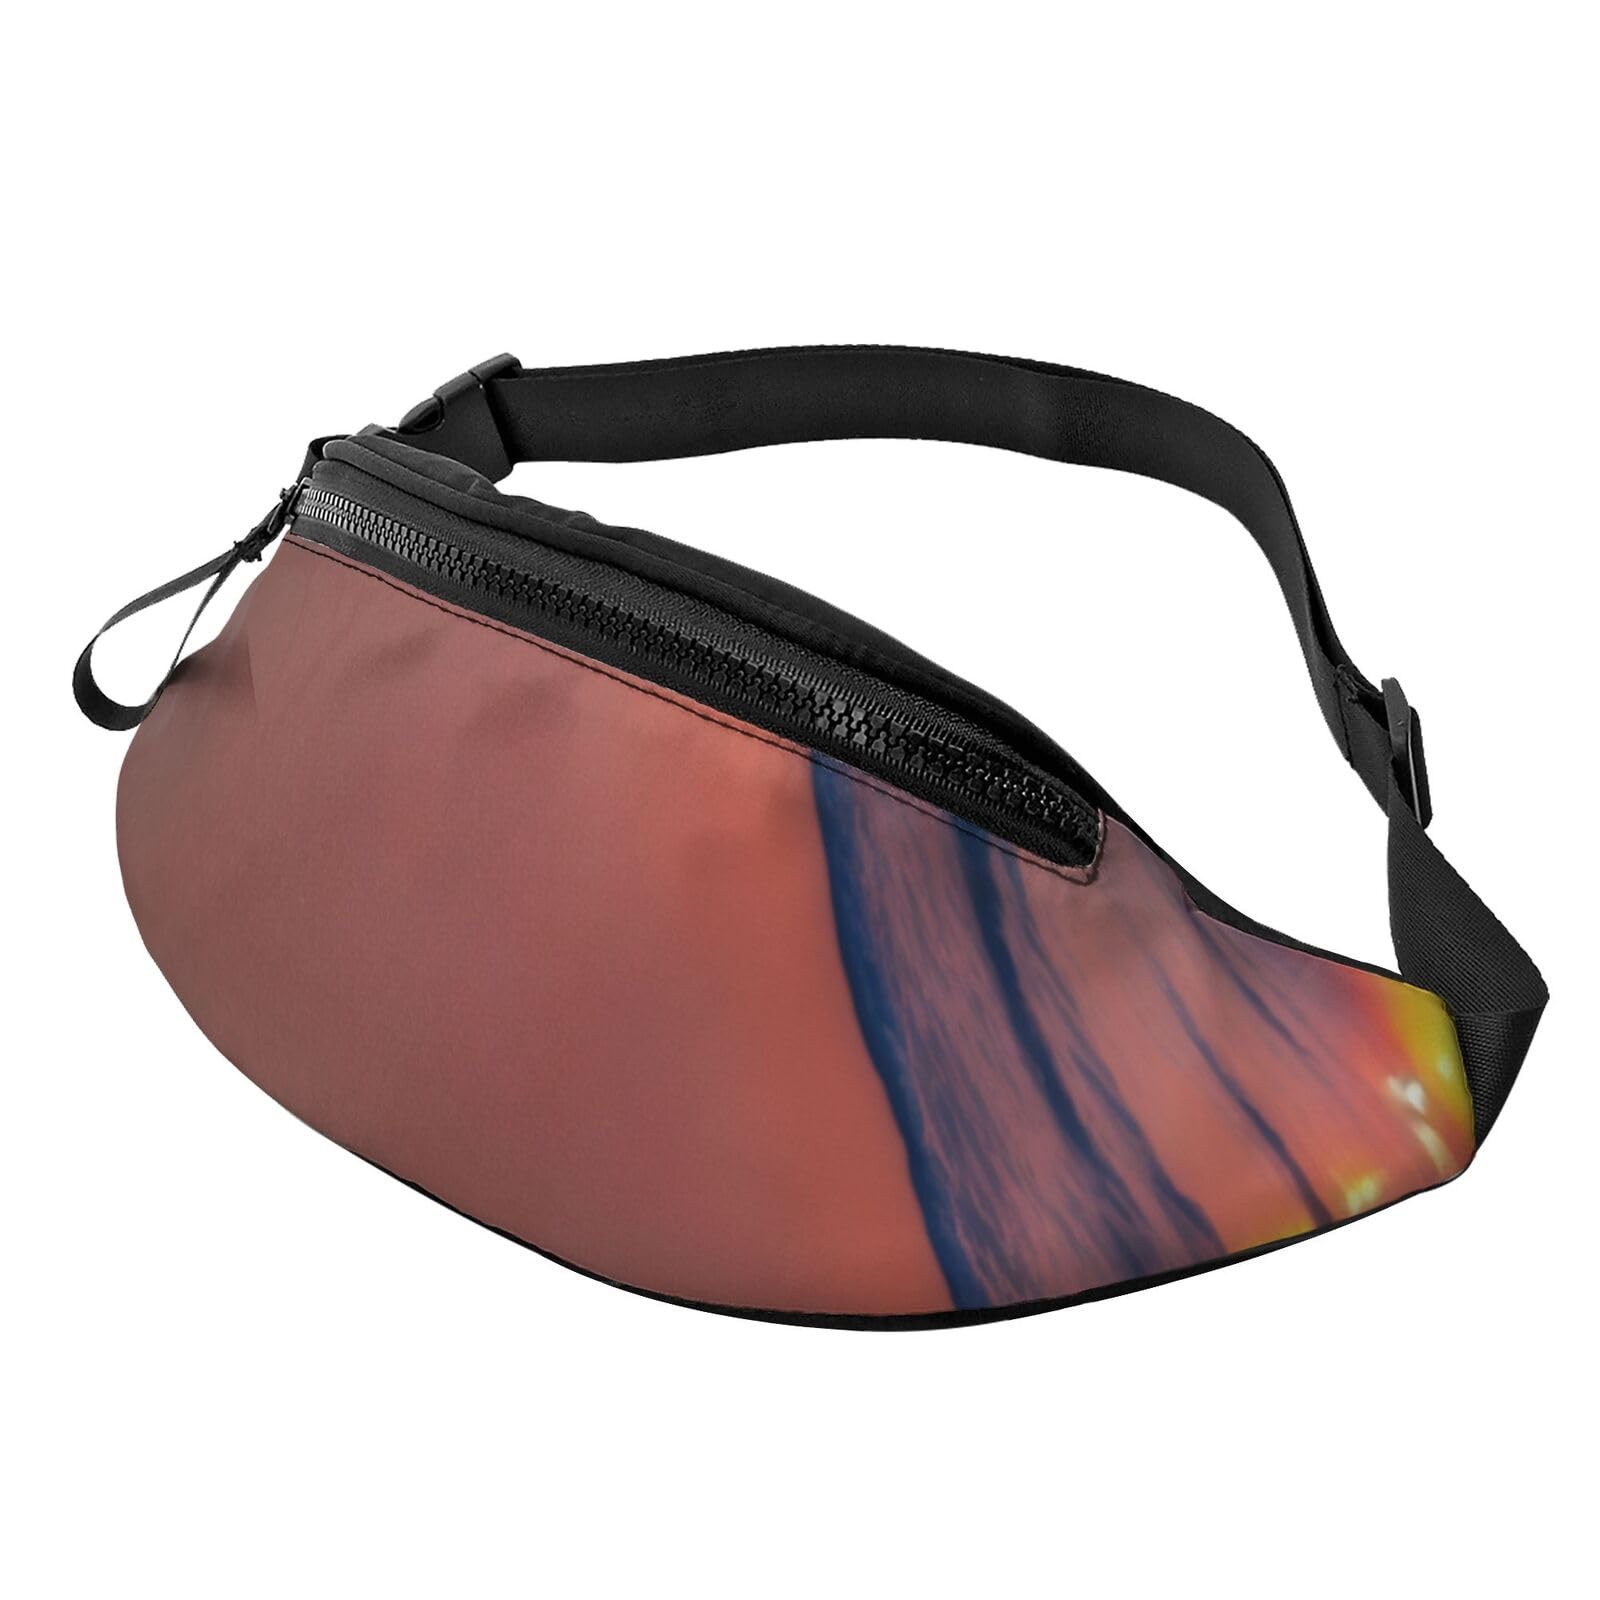 Octopus Beach Sunset Fanny Pack For Women And Men Fashion Waist Bag With Adjustable Strap For Hiking Running Cycling